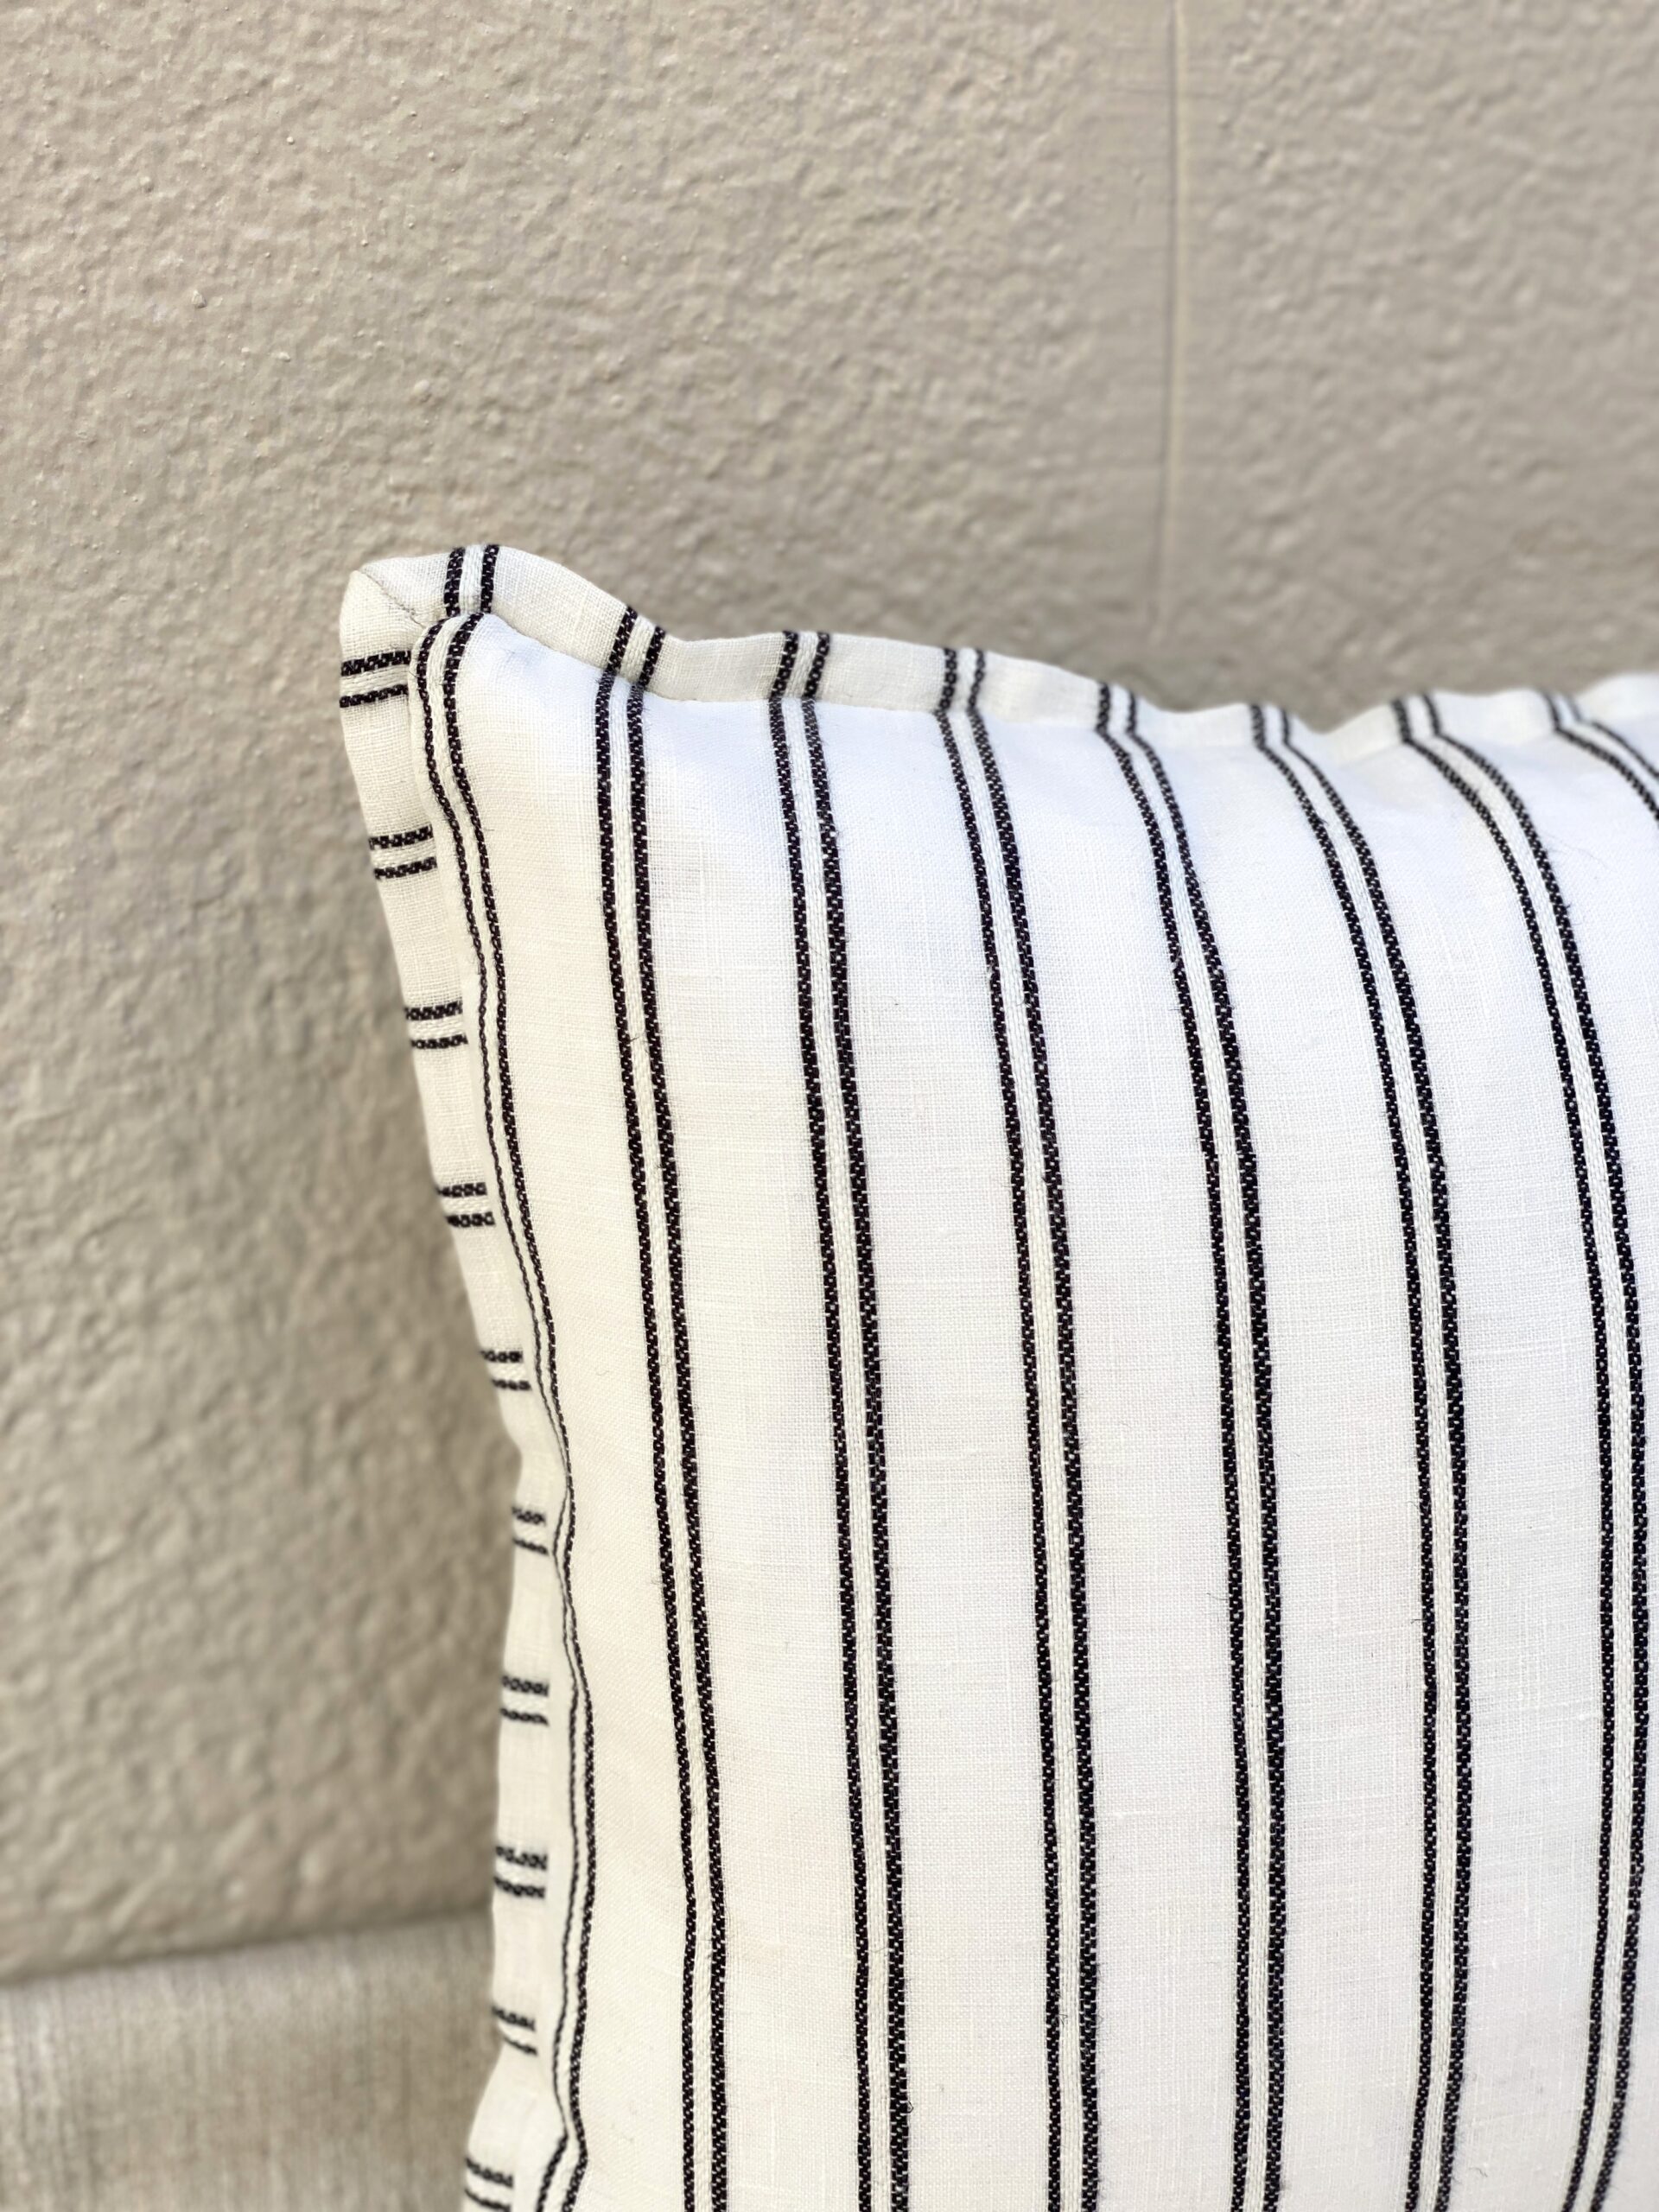 S. Harris American Style Pillows